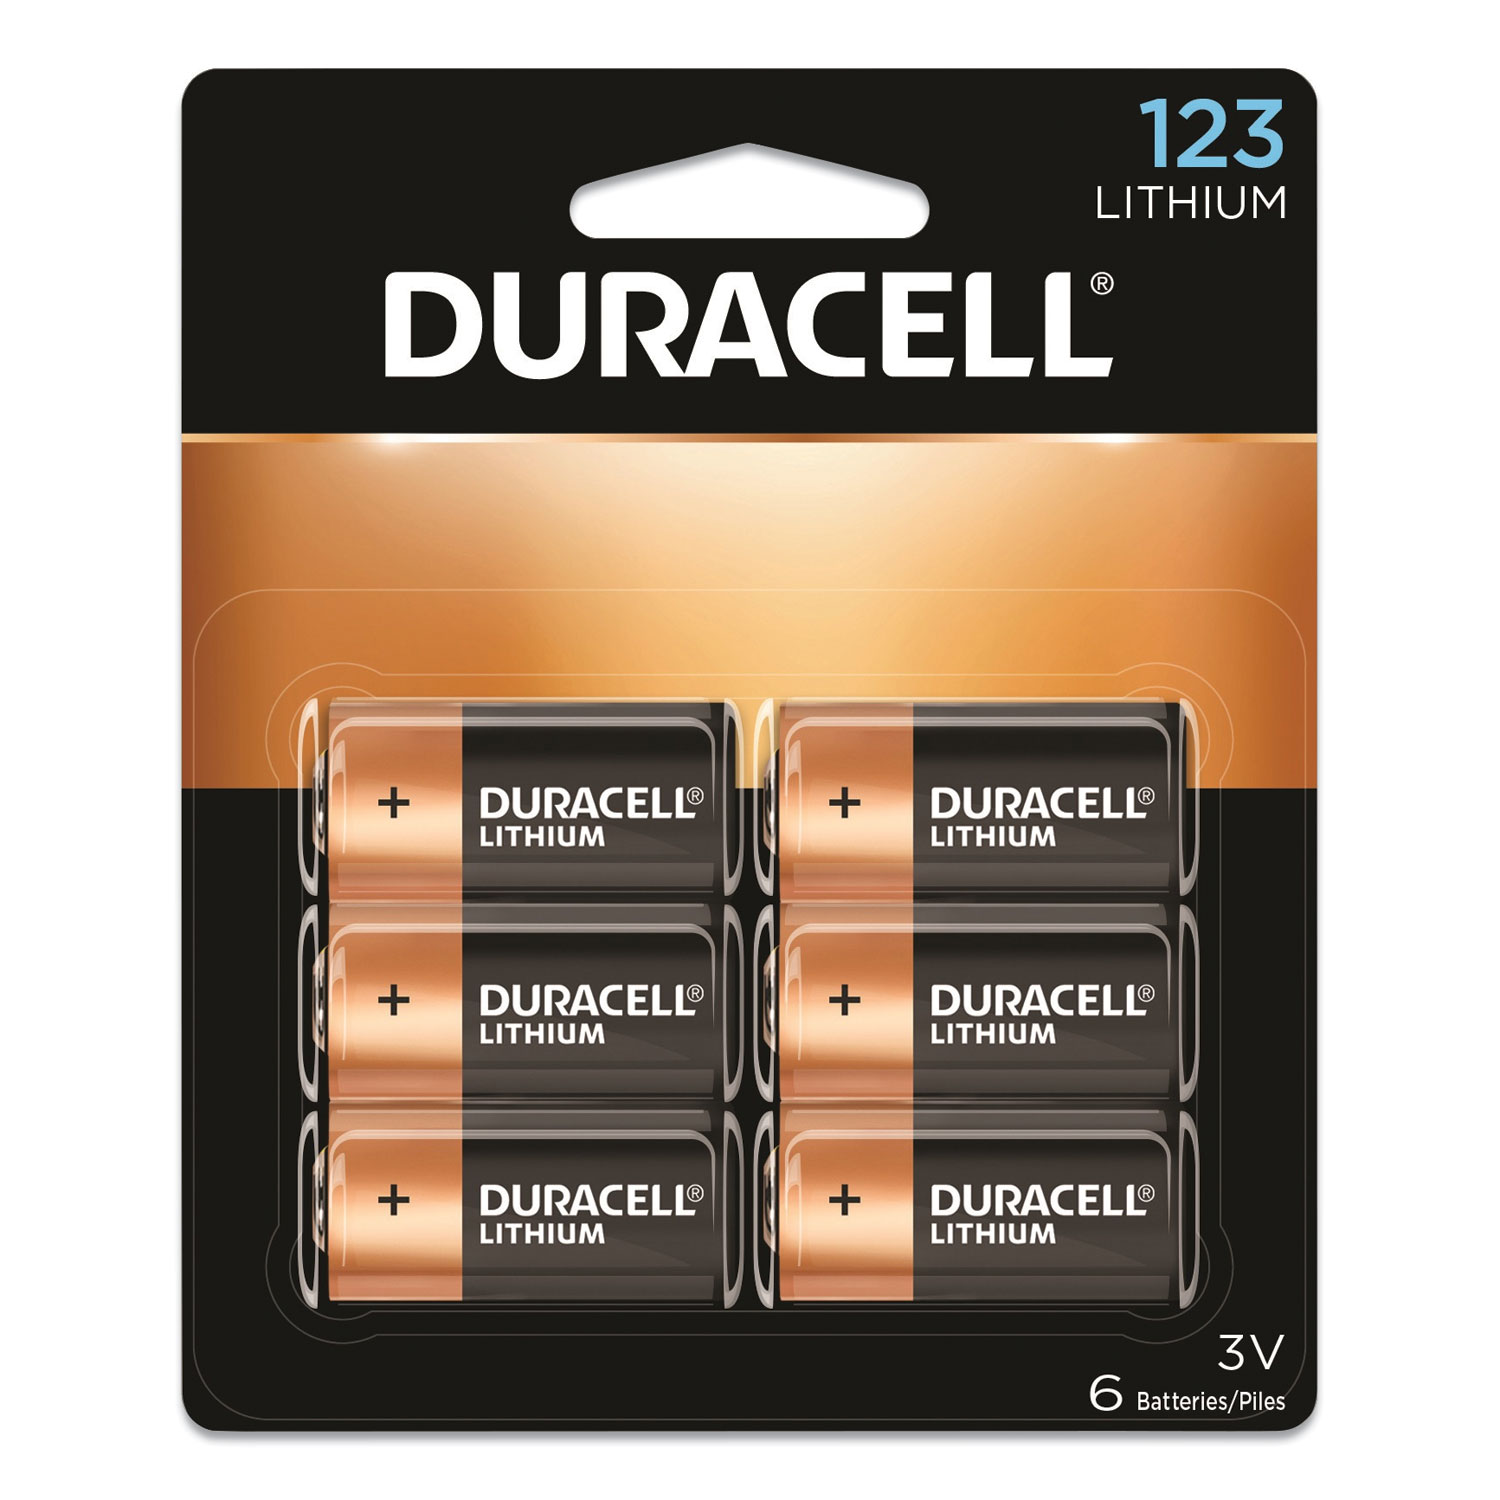  Duracell DL123AB6PK Specialty High-Power Lithium Batteries, 123, 3 V, 6/Pack (DURDL123AB6PK) 